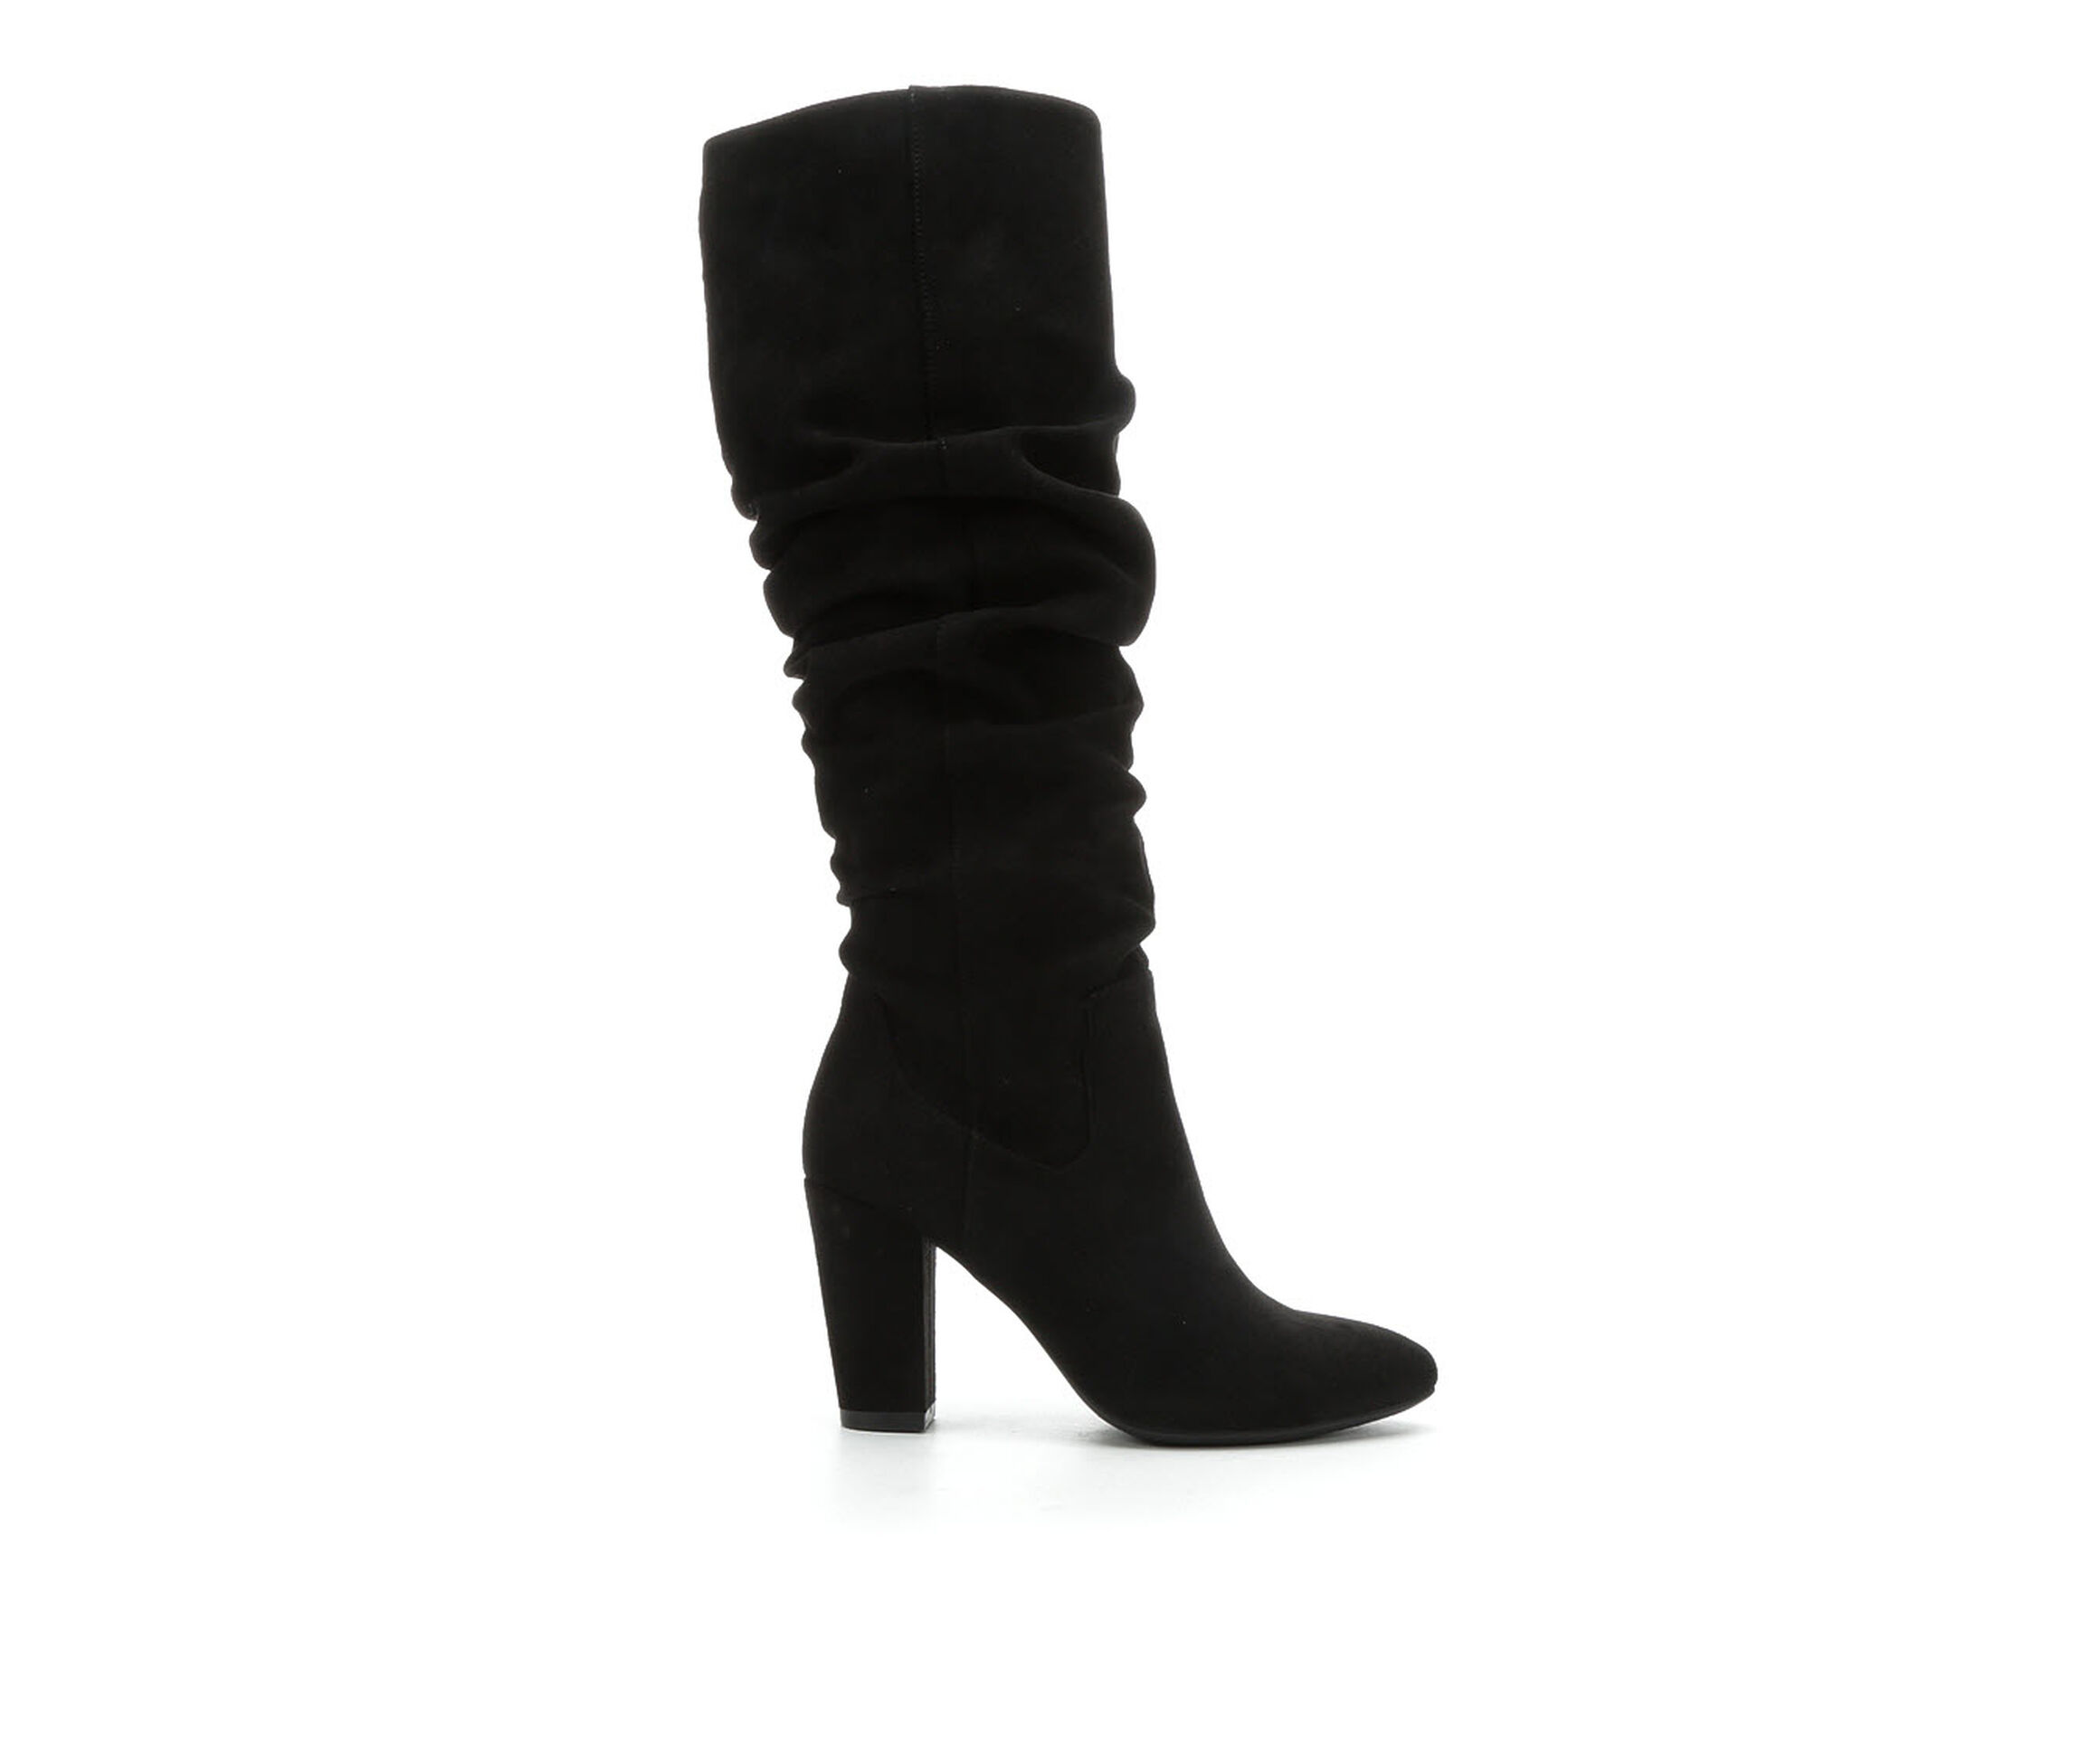 Shop Now For The Women's Y-Not Compassion Ruched Knee High Boot in Black  Size 5.5 Medium | AccuWeather Shop